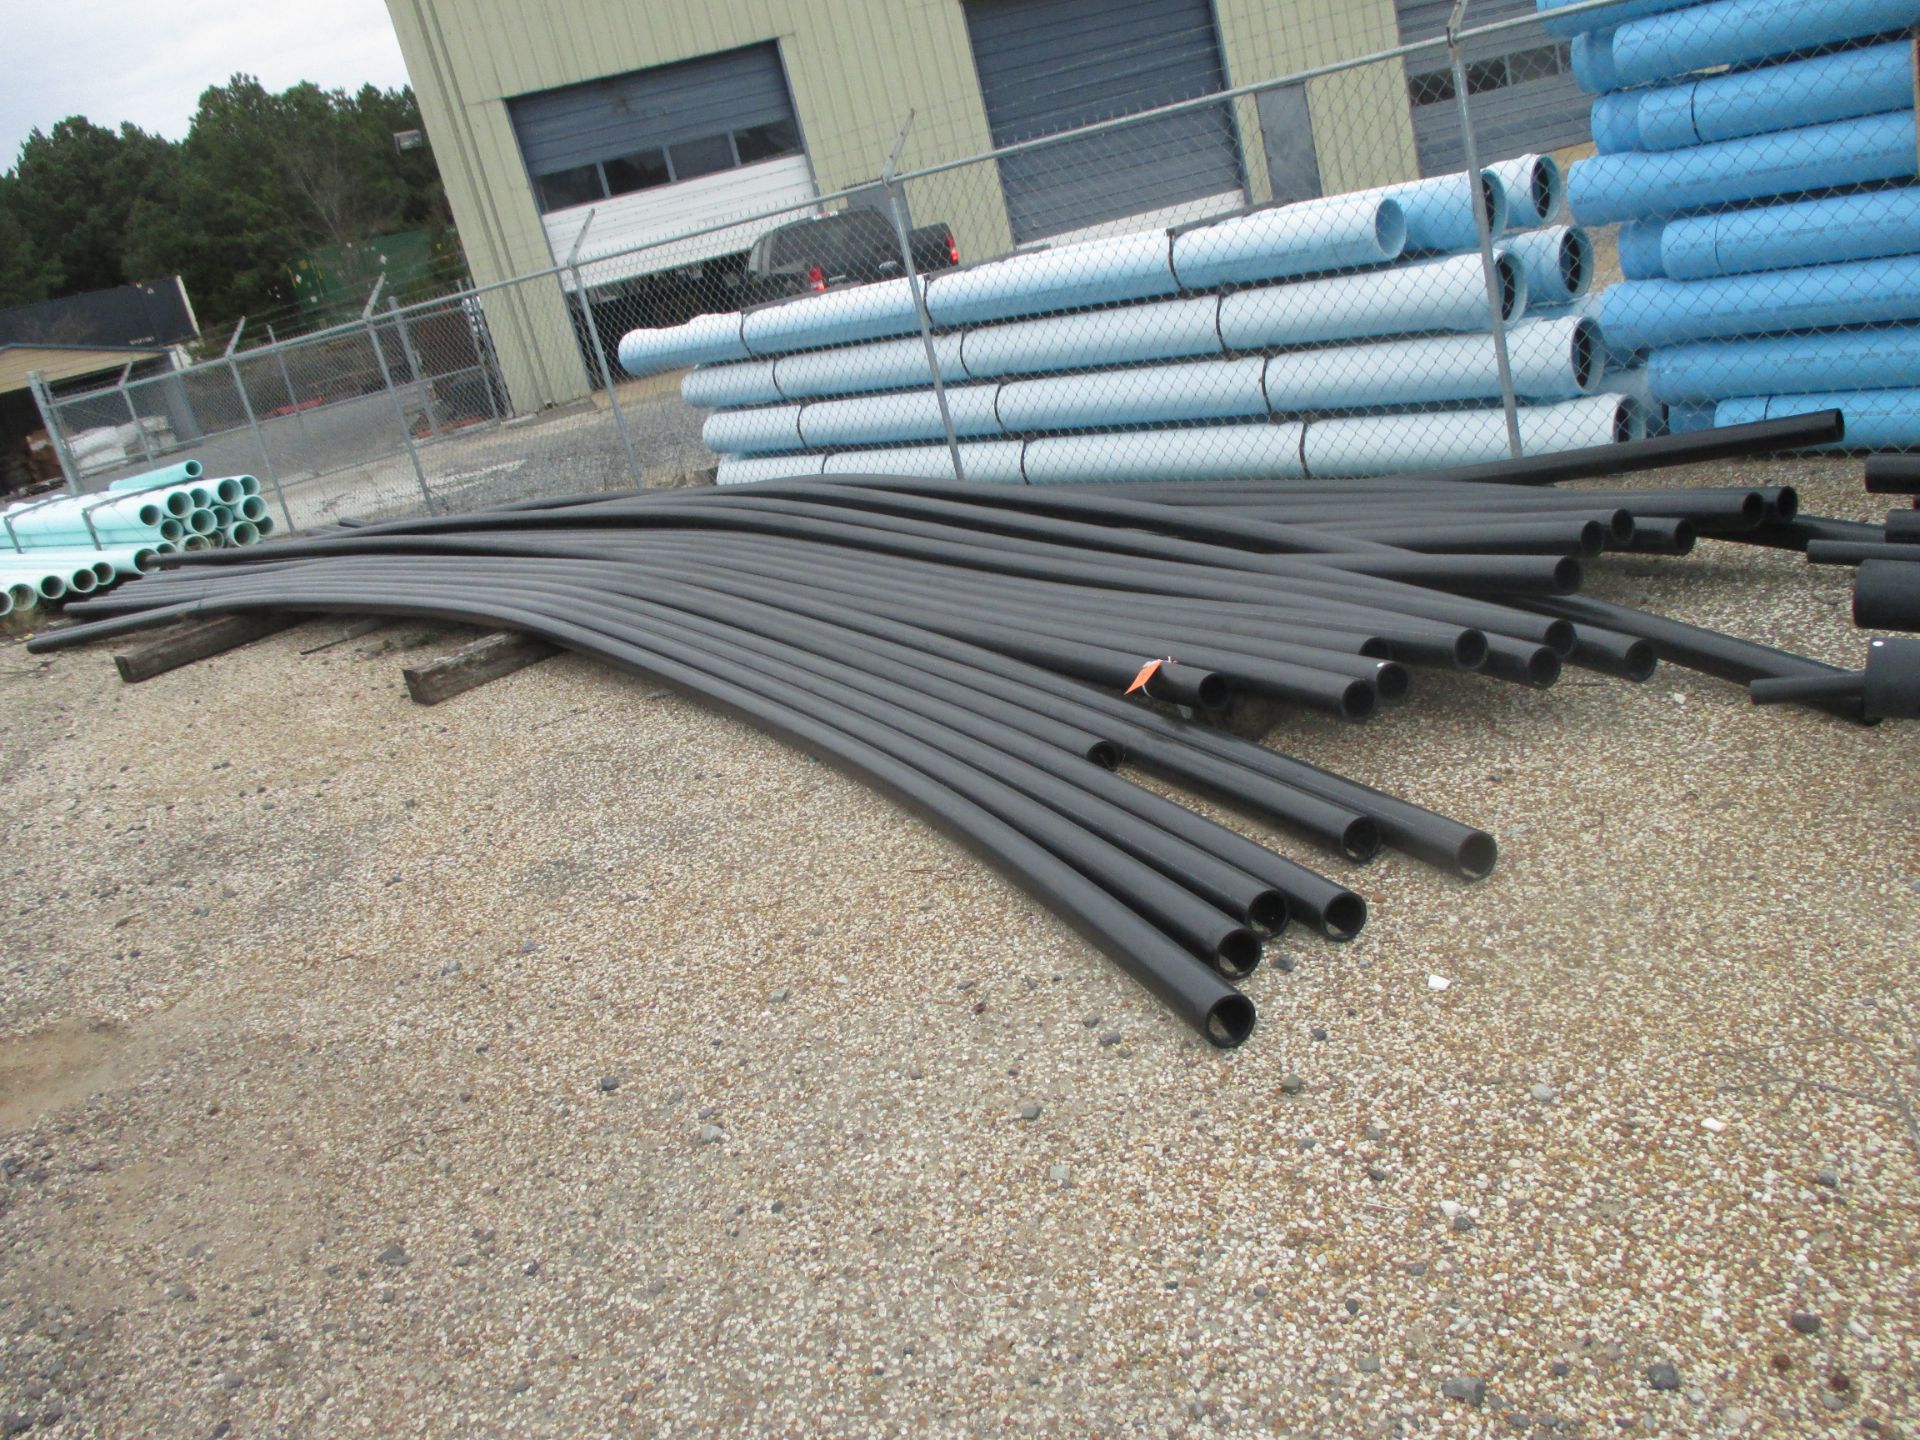 LARGE QUANTITY OF BLACK DESIGN FLOW PLASTIC PIPE OF VARIOUS SIZES (LOCATED AT 100 INDUSTRIAL AVE